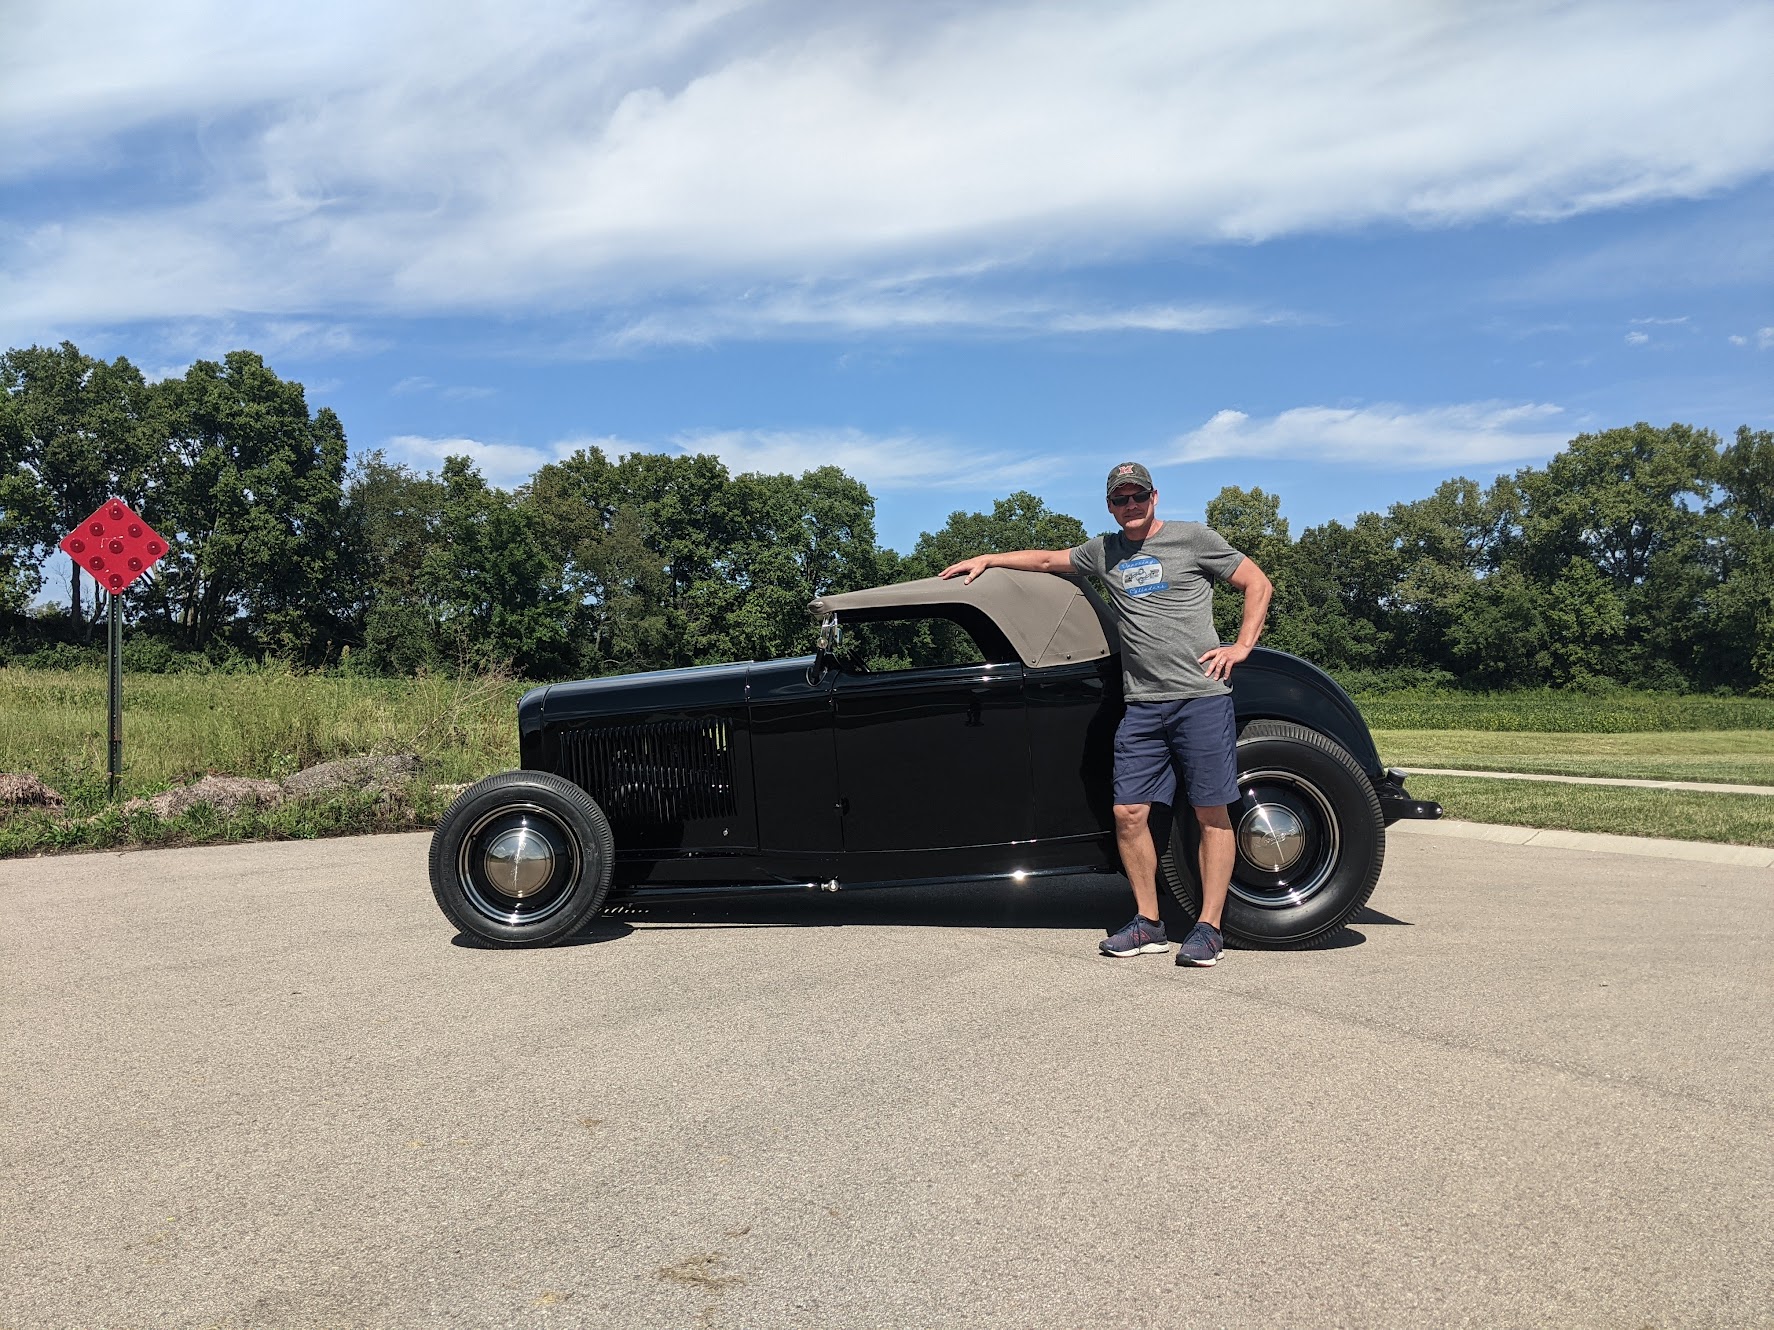 Taking Possession of the Steadfast Roadster…